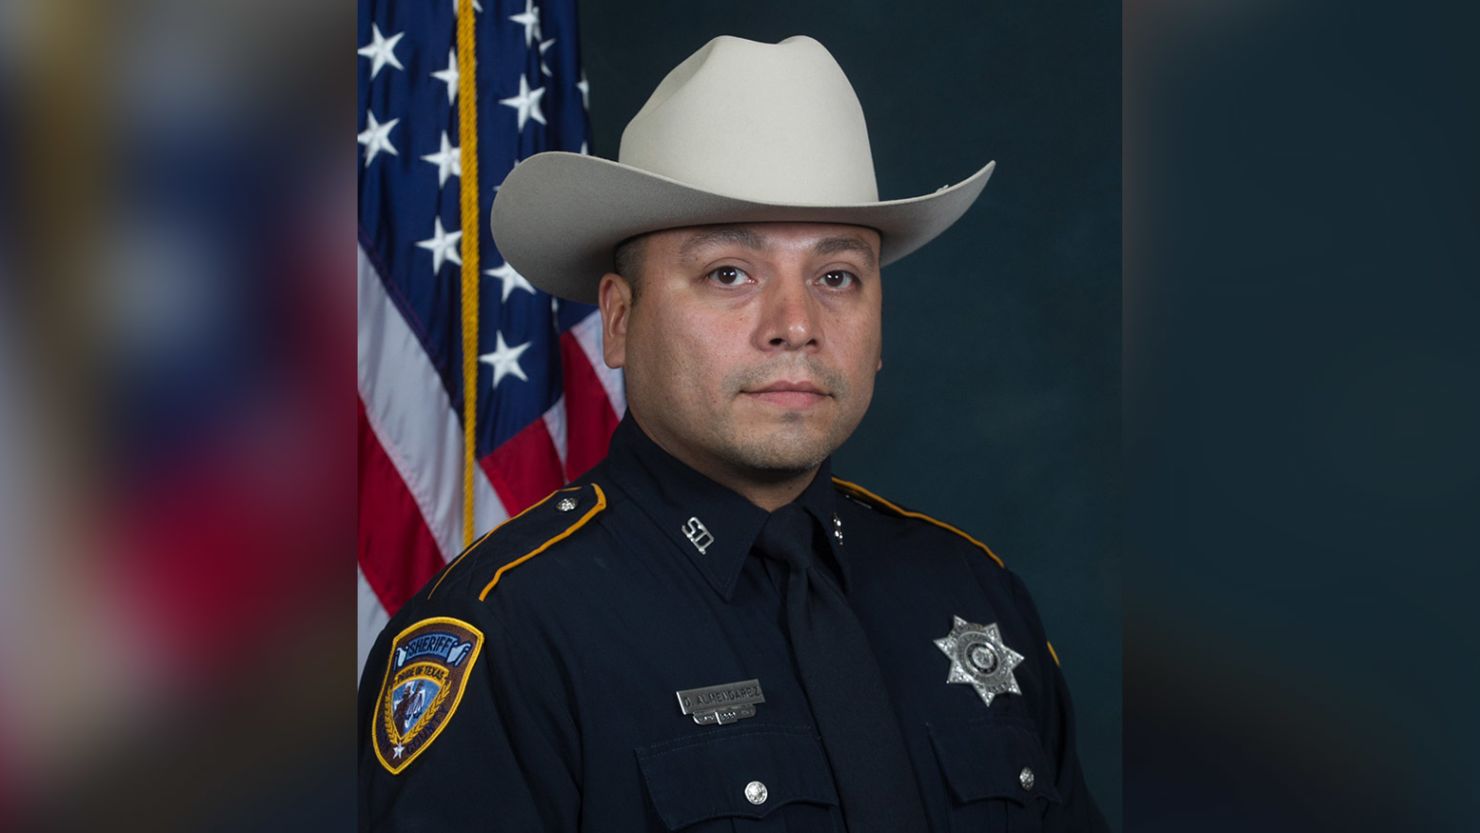 Harris County Sheriff's Deputy Darren Almendarez was shot and killed in a grocery store parking lot while he was off-duty, officials said.